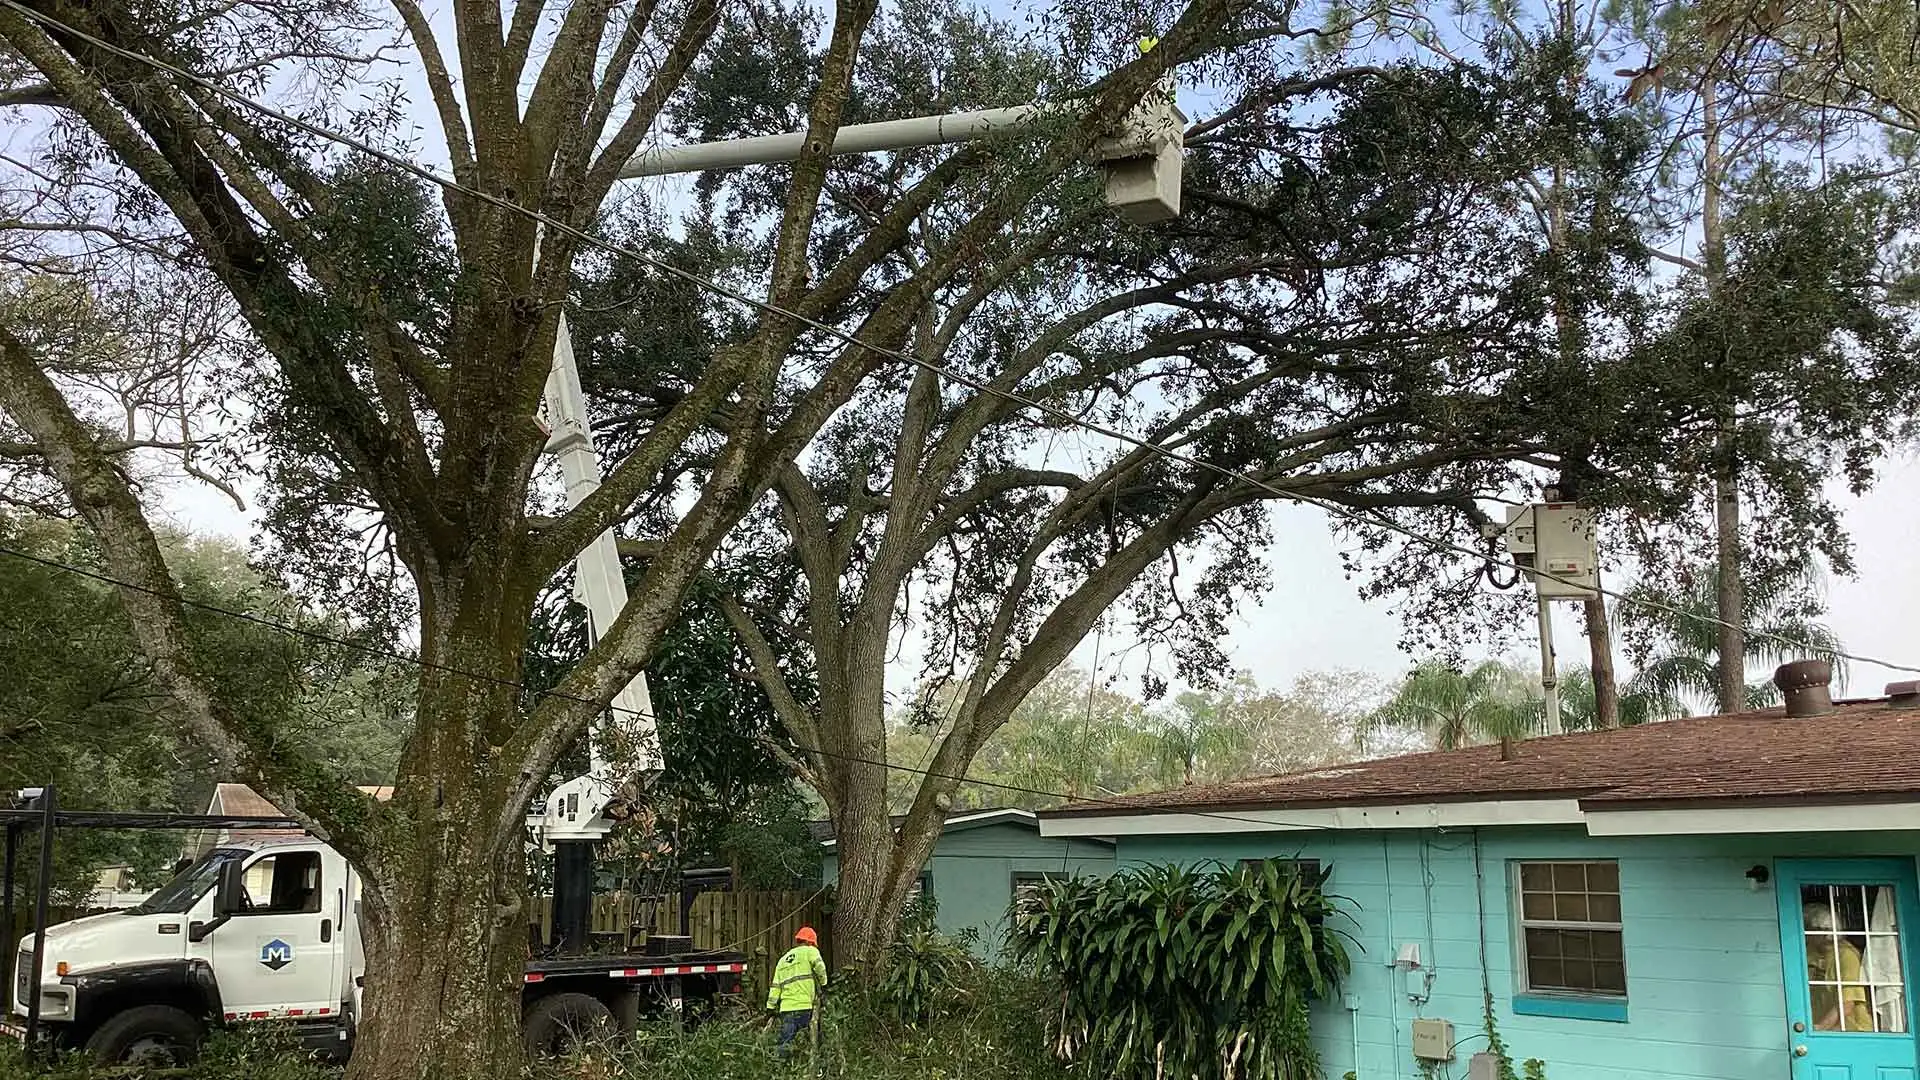 Tree expert in boom truck clearing damaged tree and limbs near Clearwater, FL.